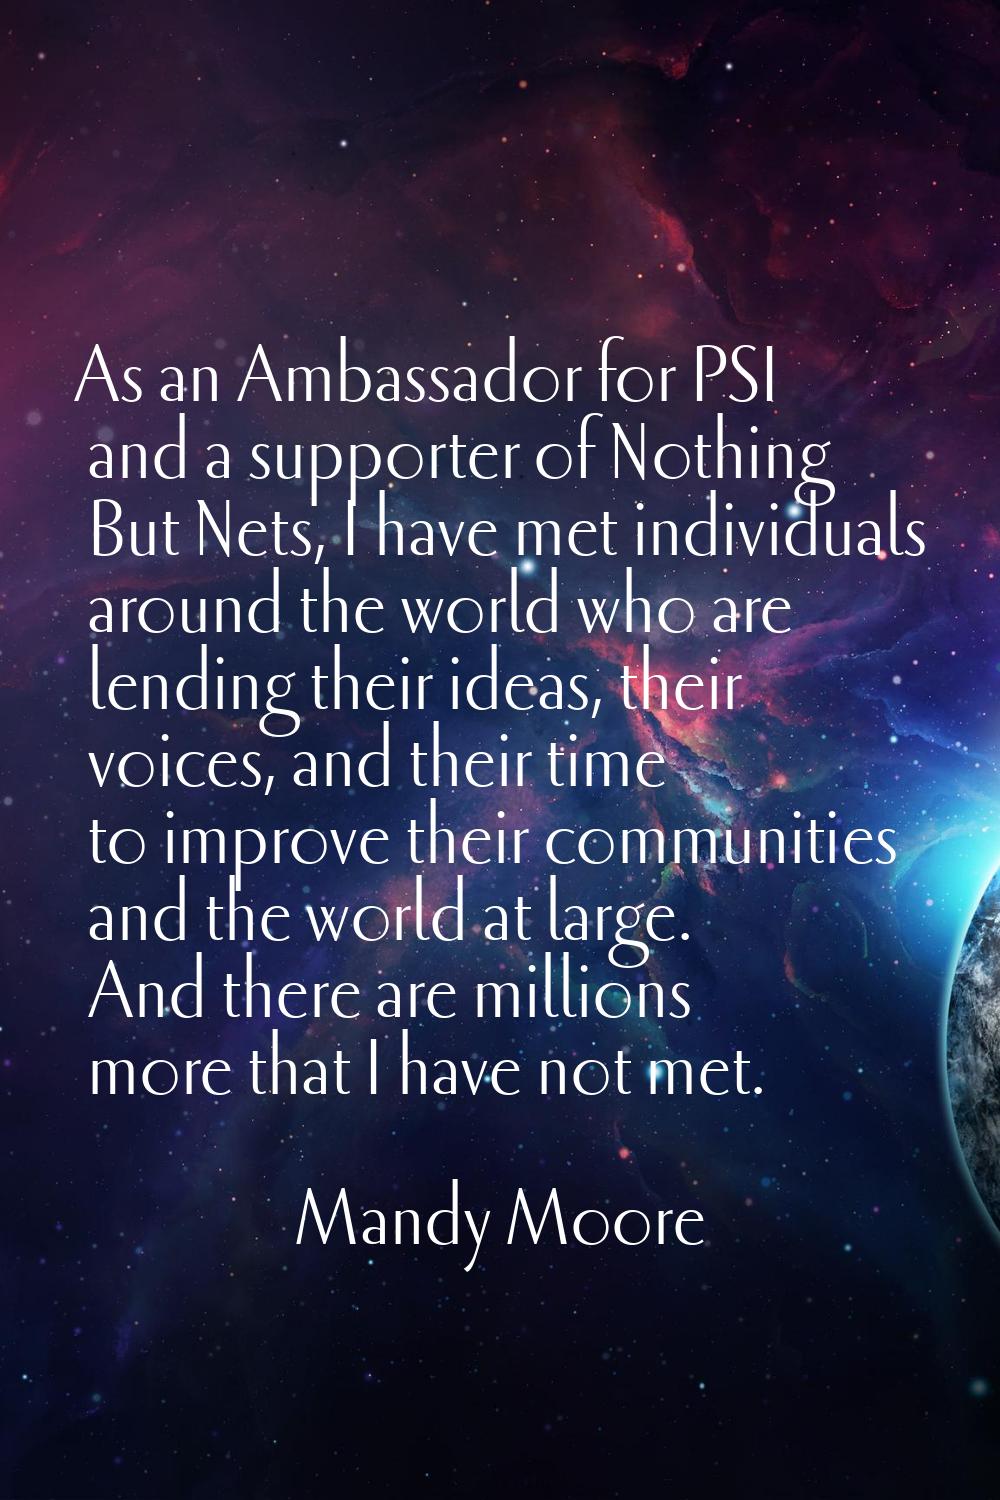 As an Ambassador for PSI and a supporter of Nothing But Nets, I have met individuals around the wor